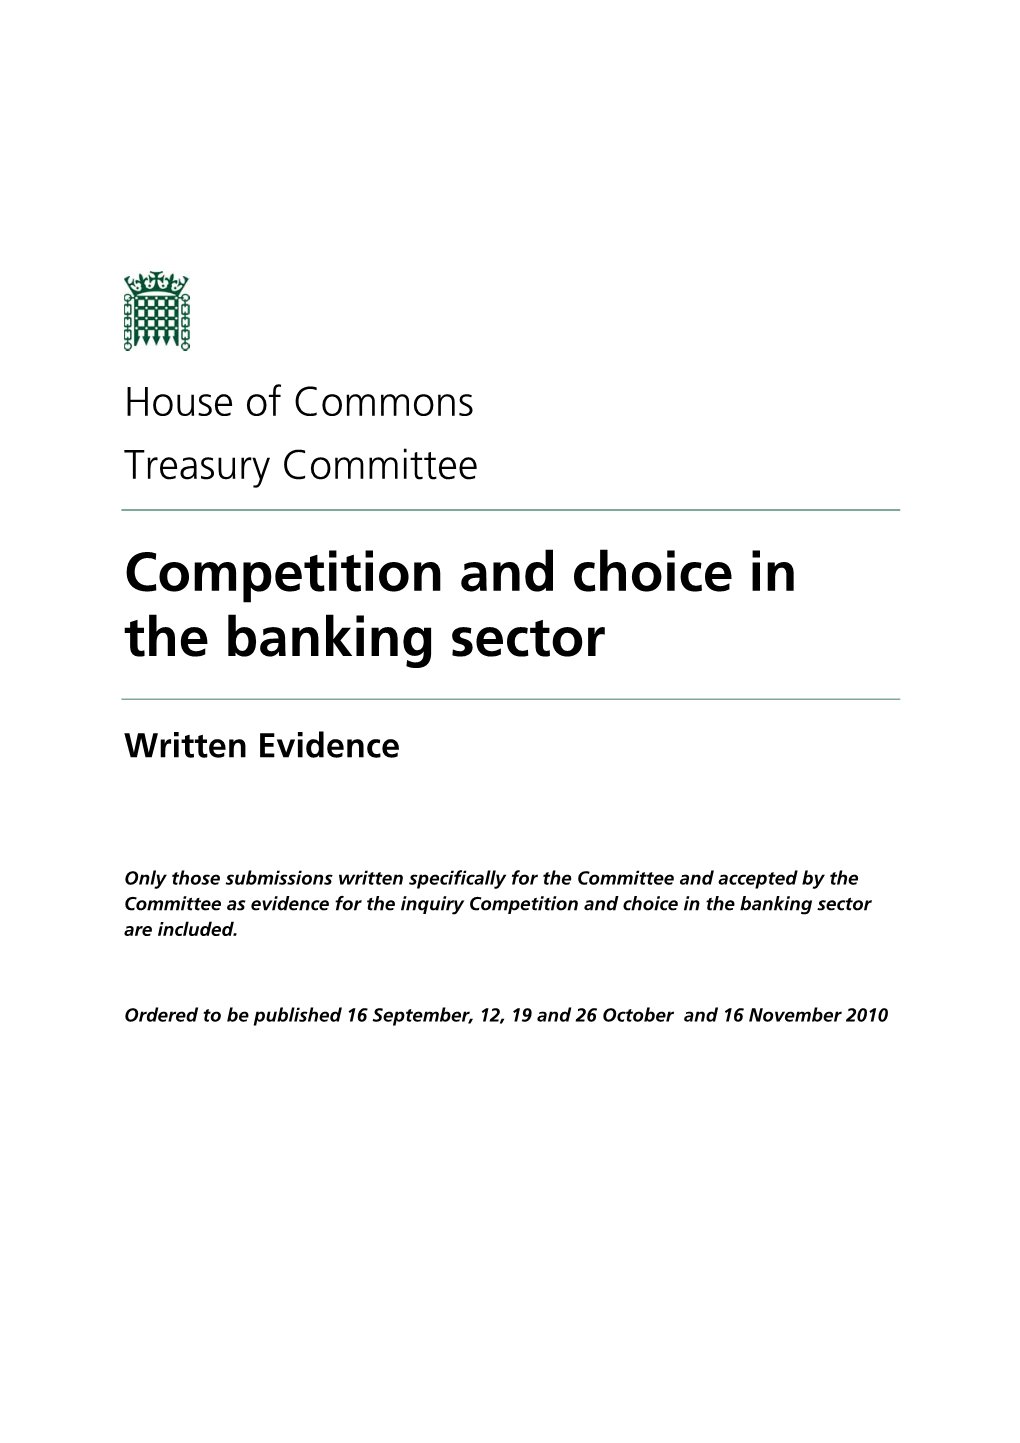 Competition and Choice in the Banking Sector